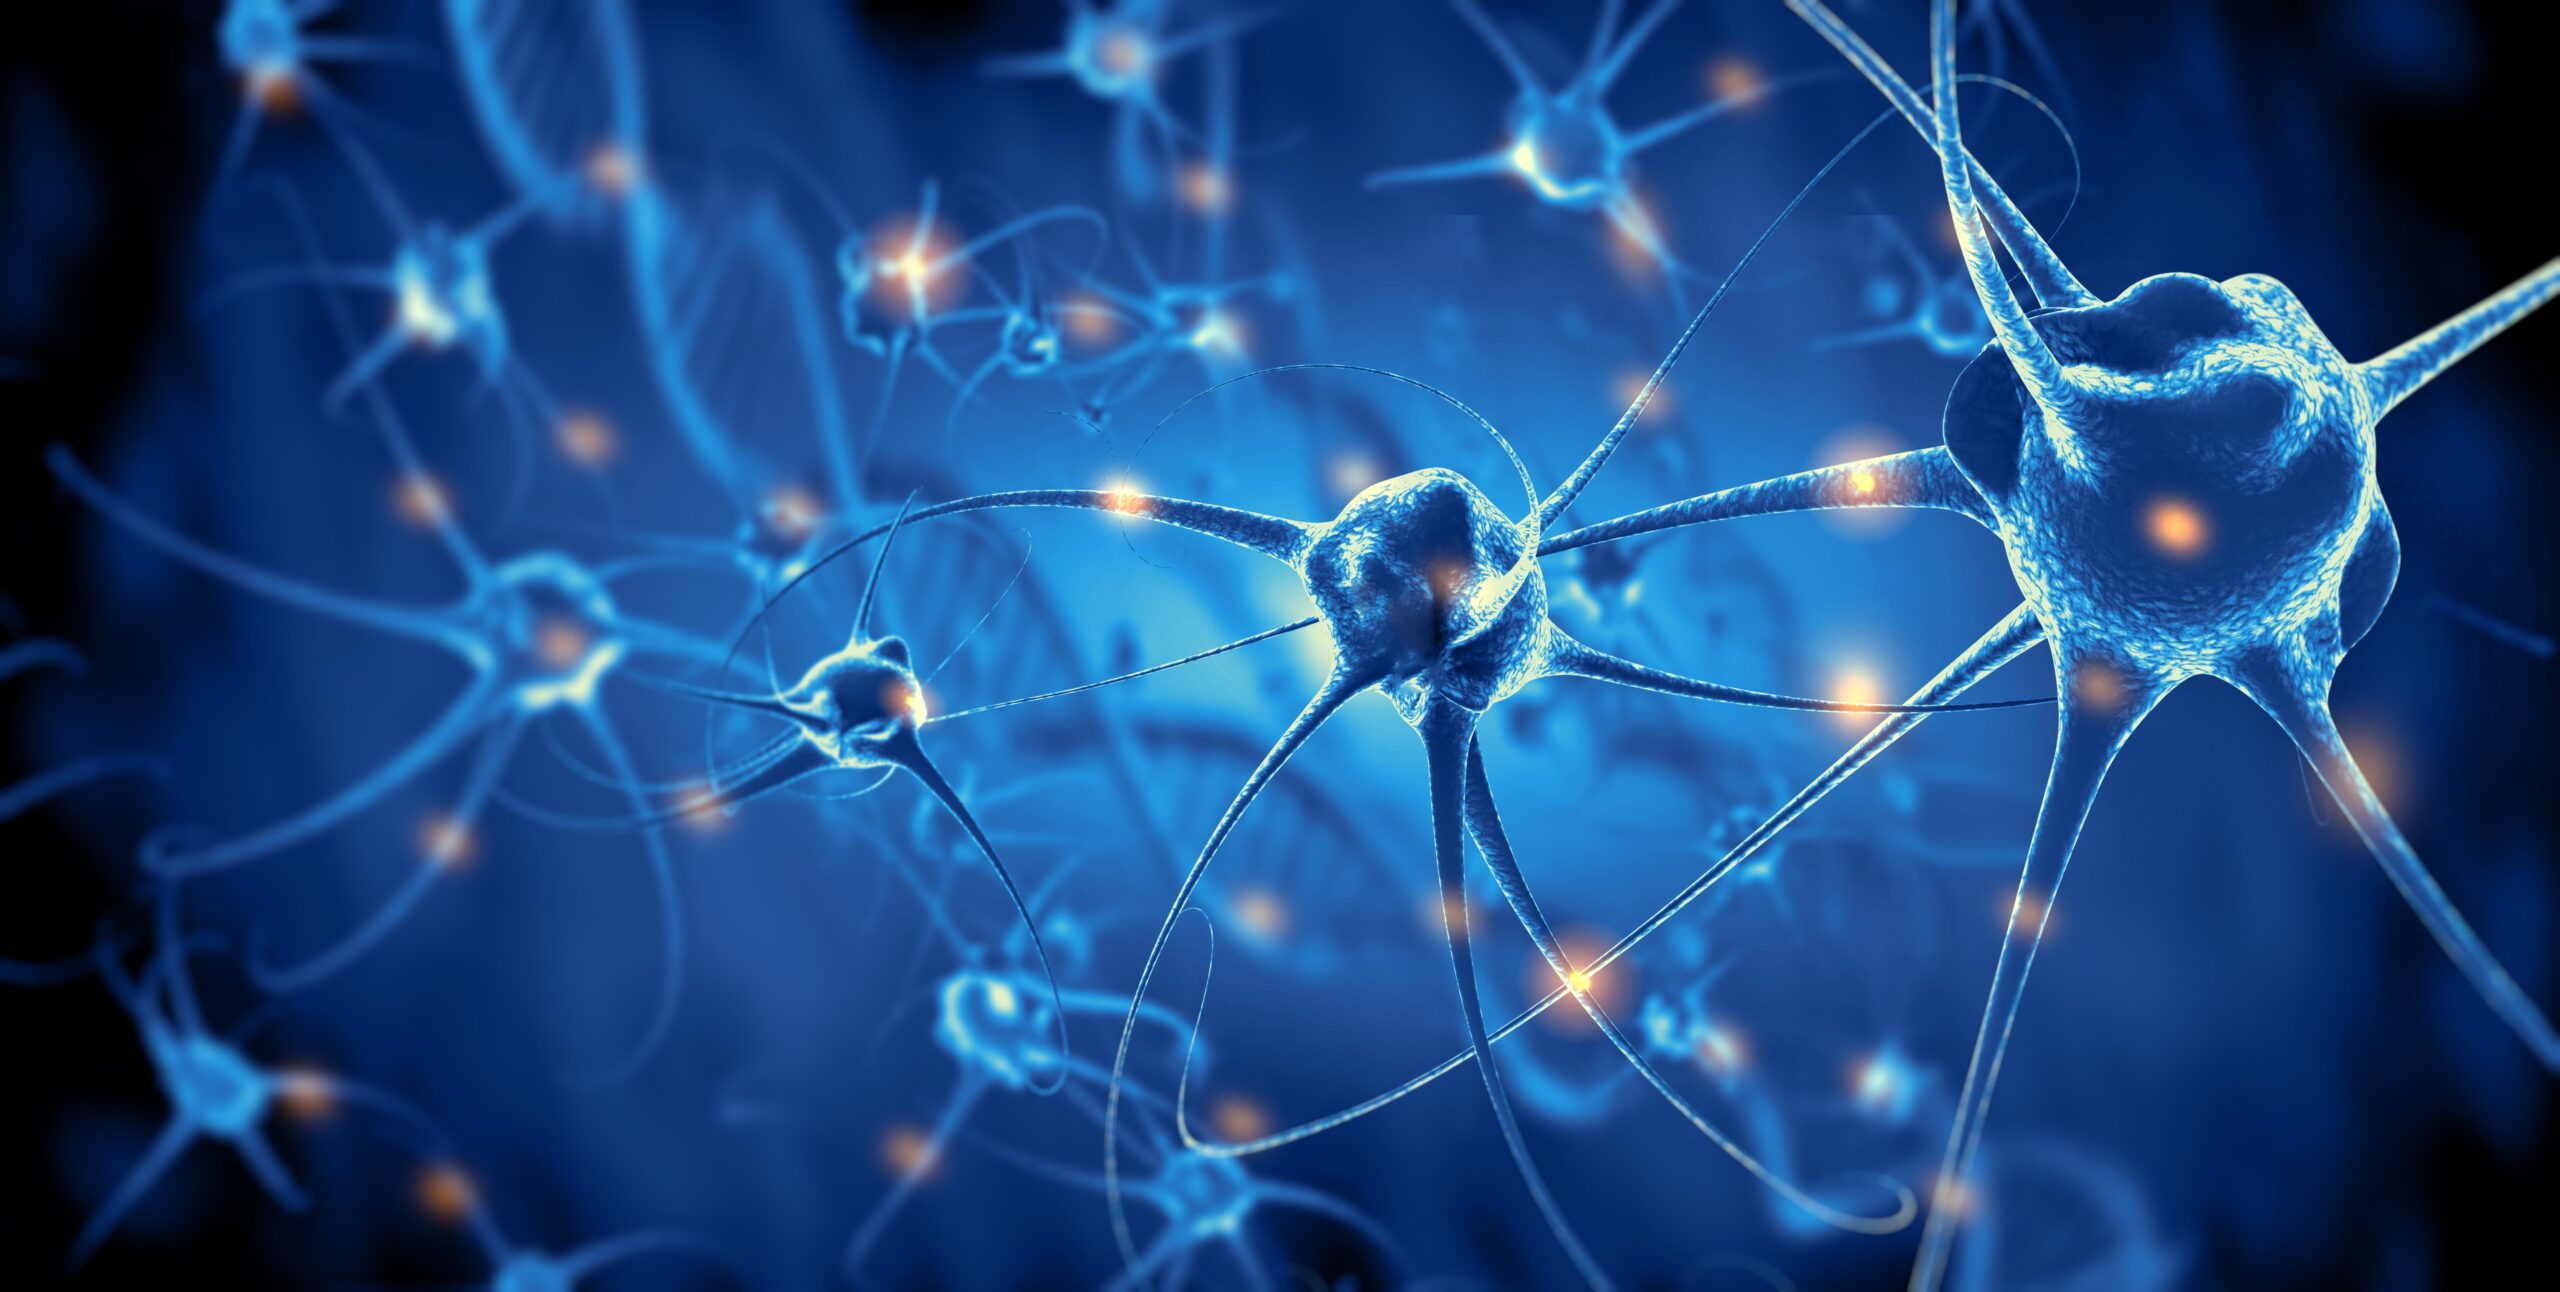 graphic illustration of blue neurons